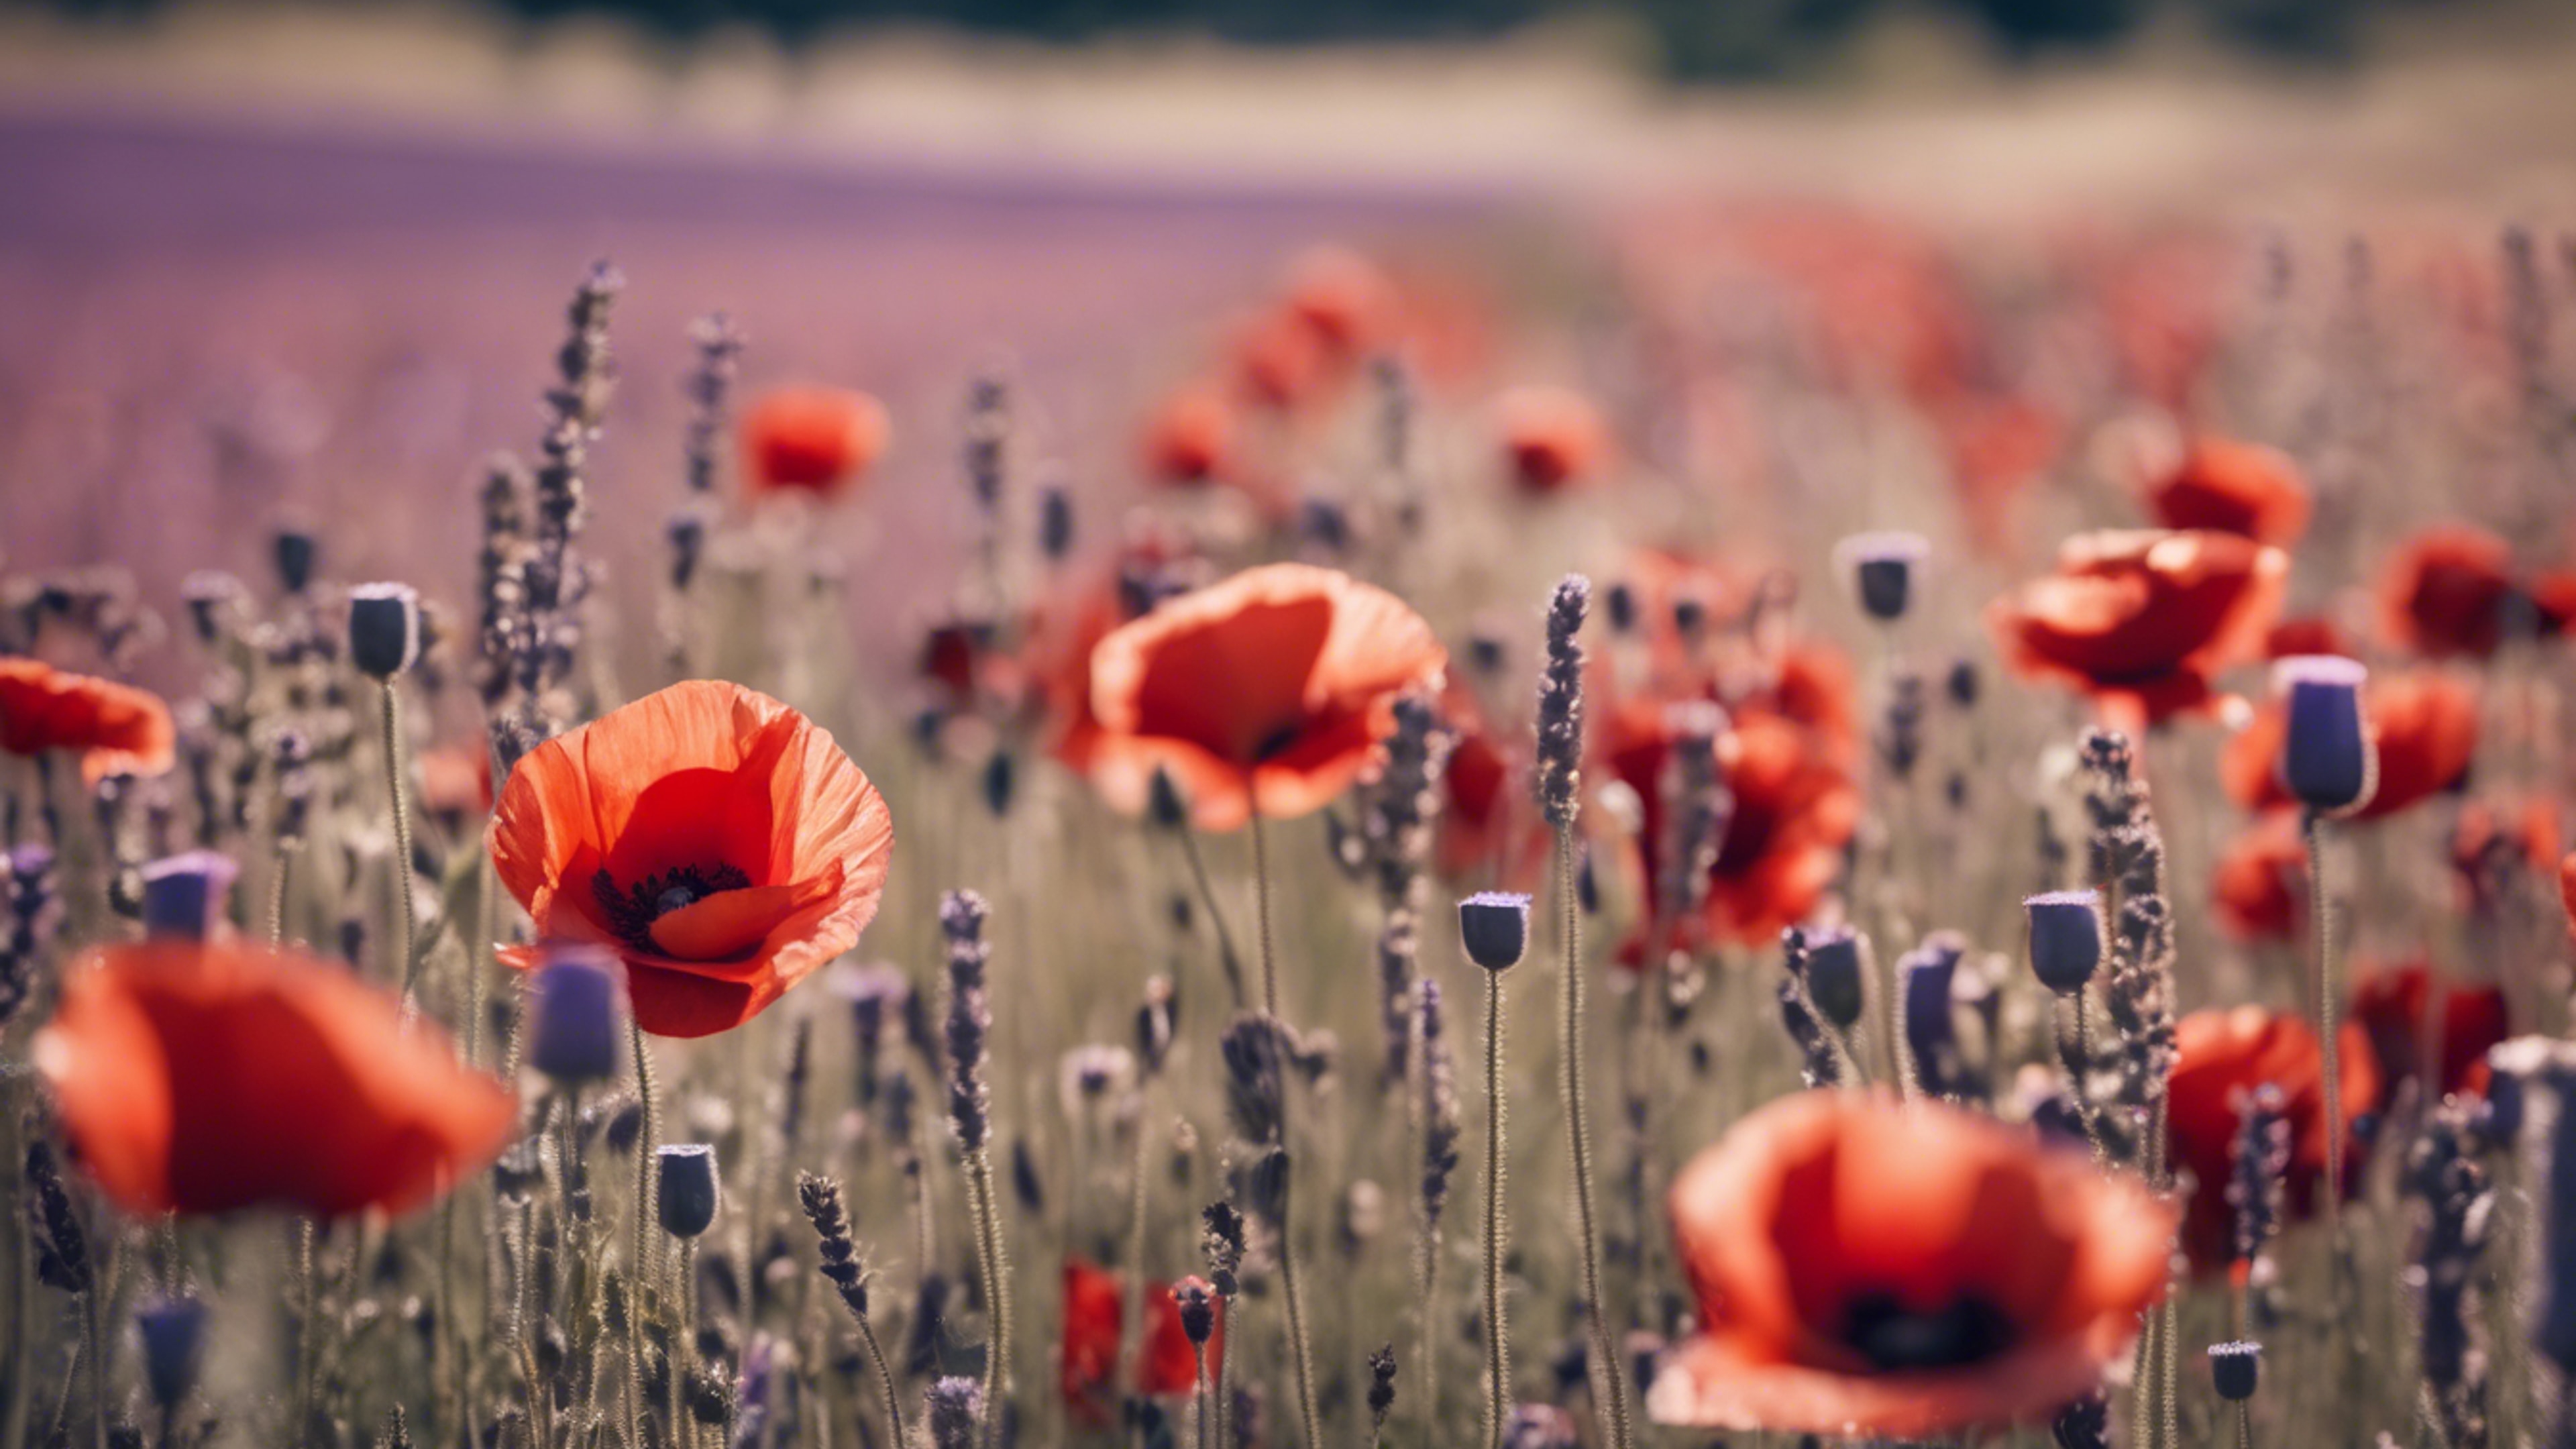 A field of red poppies naturally fading into a lavender field. 牆紙[76e938c2507742cfb107]